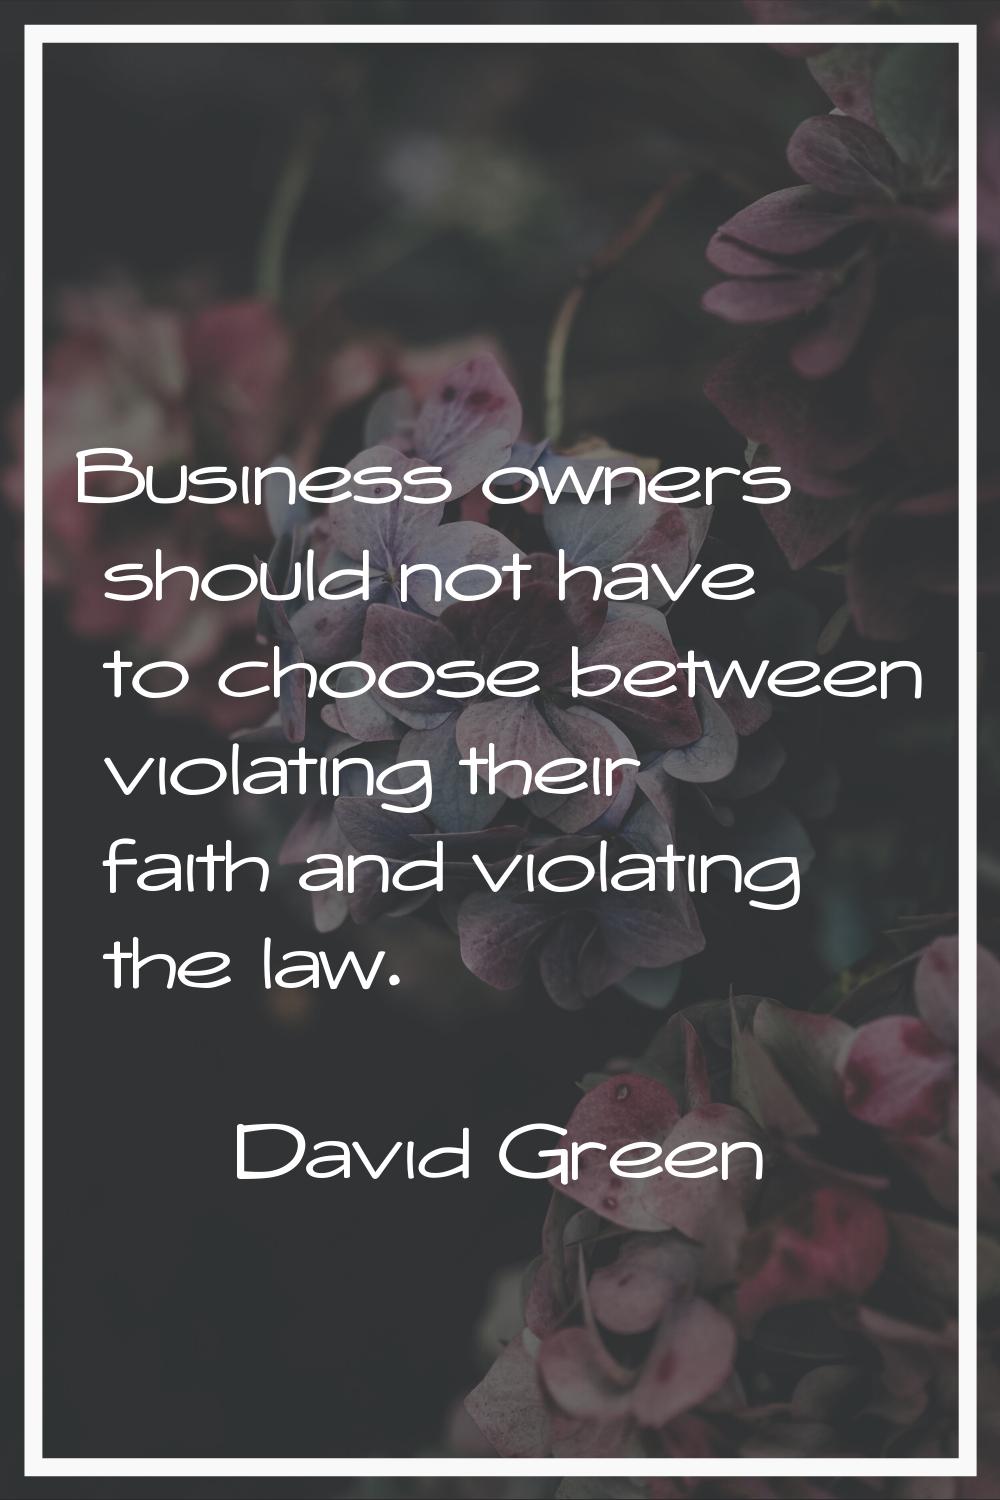 Business owners should not have to choose between violating their faith and violating the law.